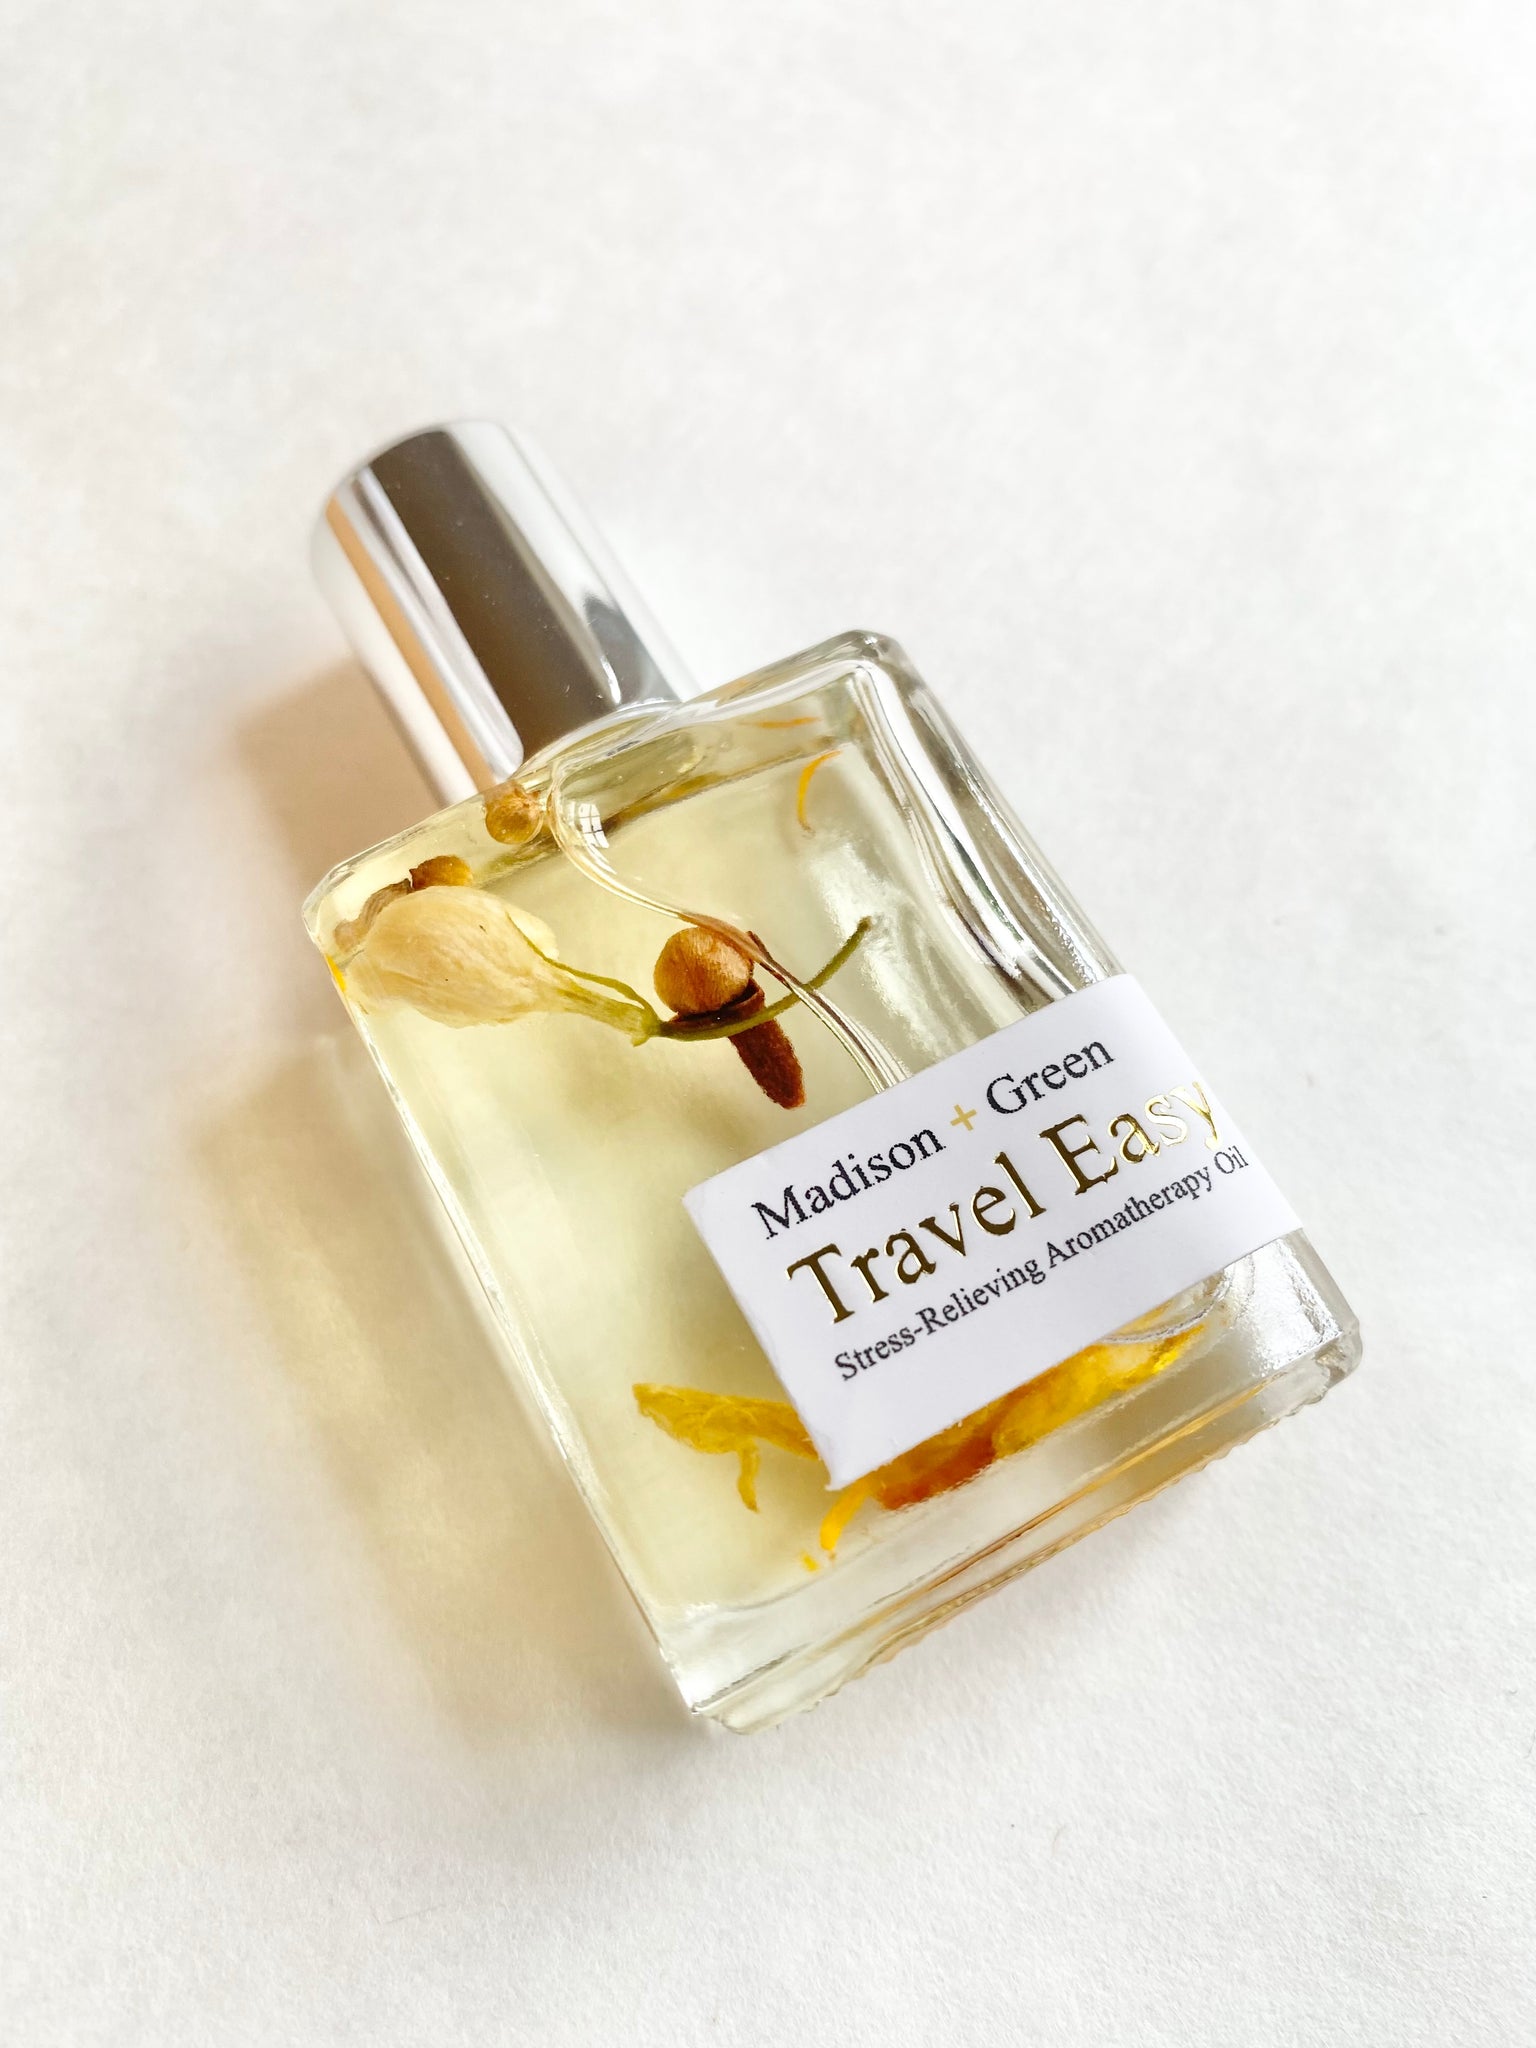 "Travel Easy” Stress-Relieving Aromatherapy Body Oil